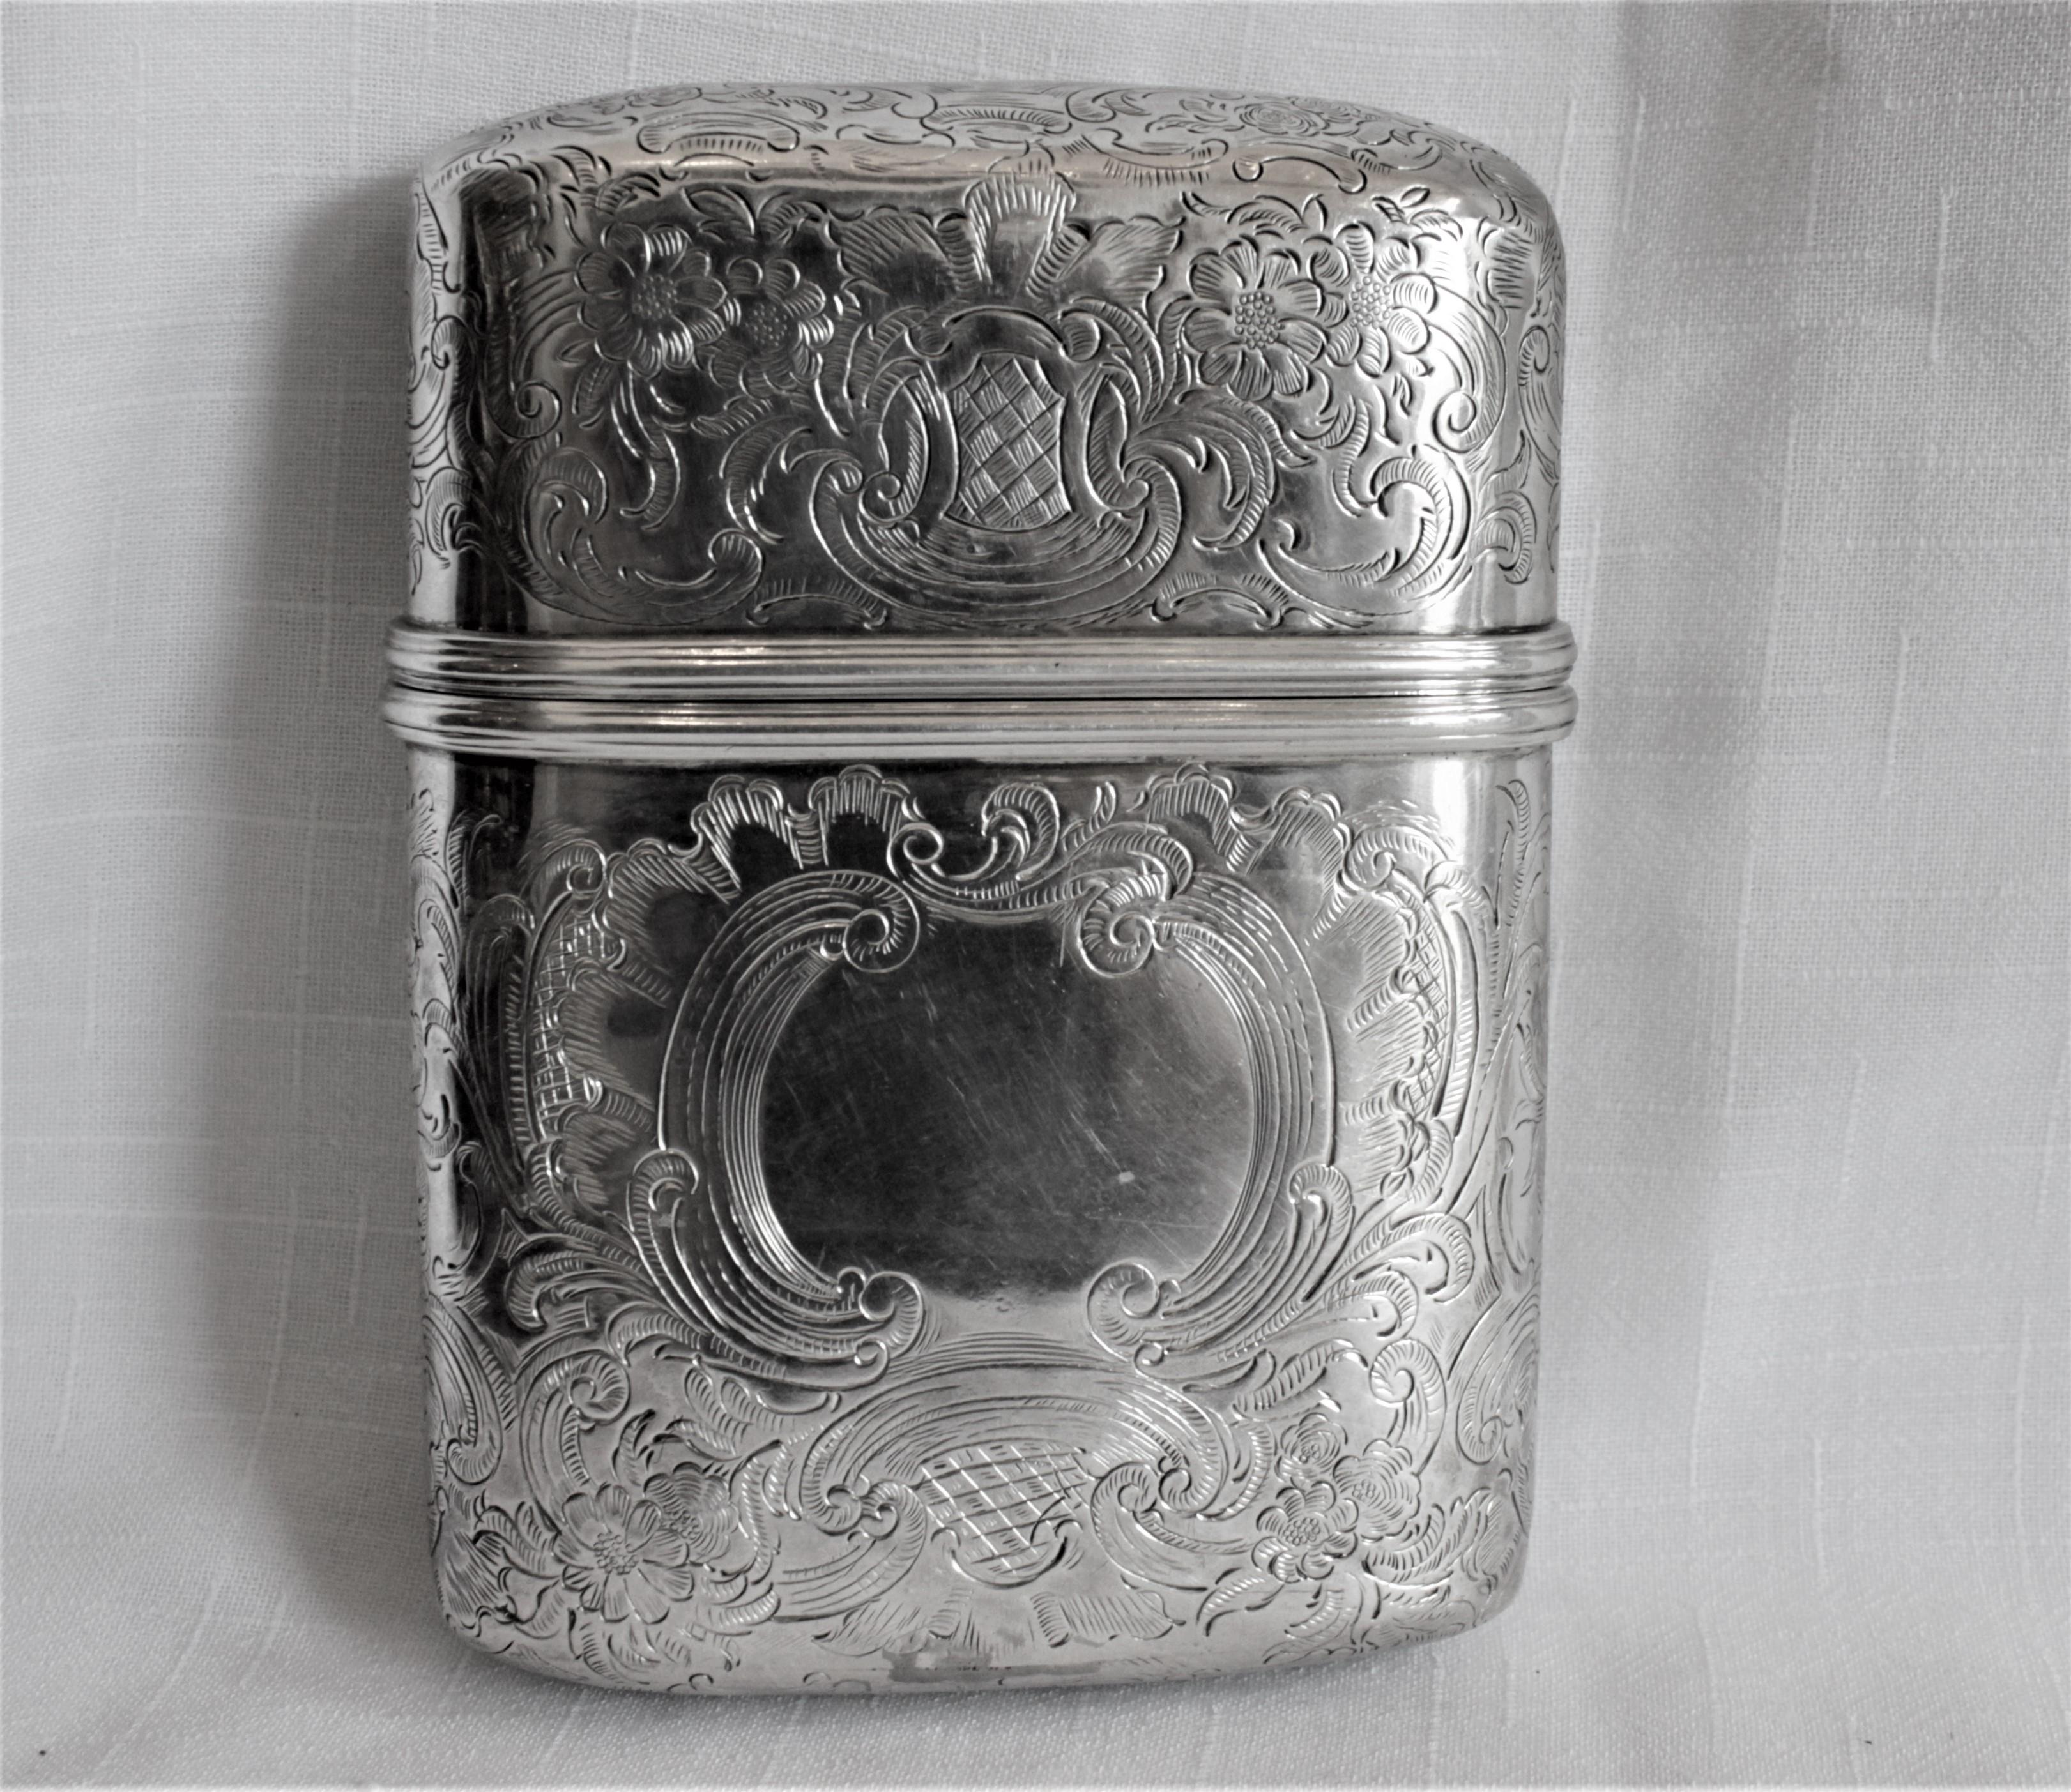 This sterling silver and intricately engraved cigar case was made in London England in circa 1831, during the reign of King George IV. The top and bottom are both ornately engraved with a scrolling leaf decoration and each is hallmarked. The top